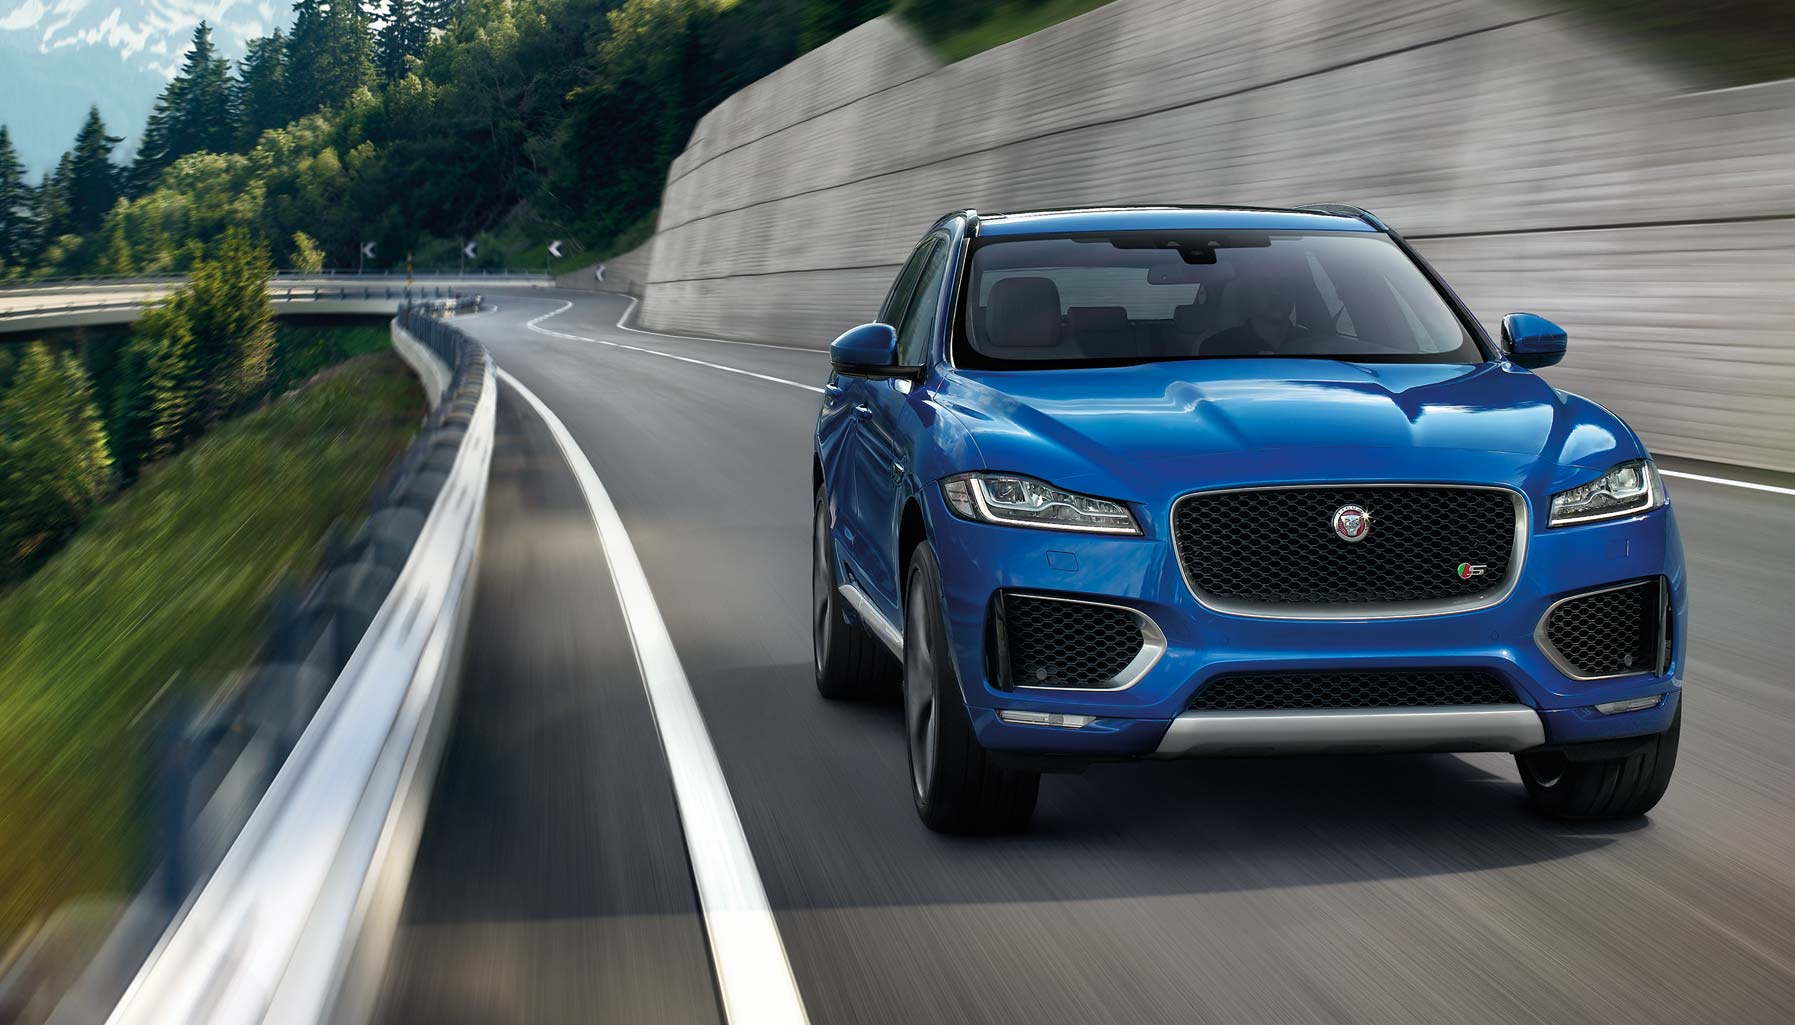 Jaguar's F-Pace is agile, and ready to pounce